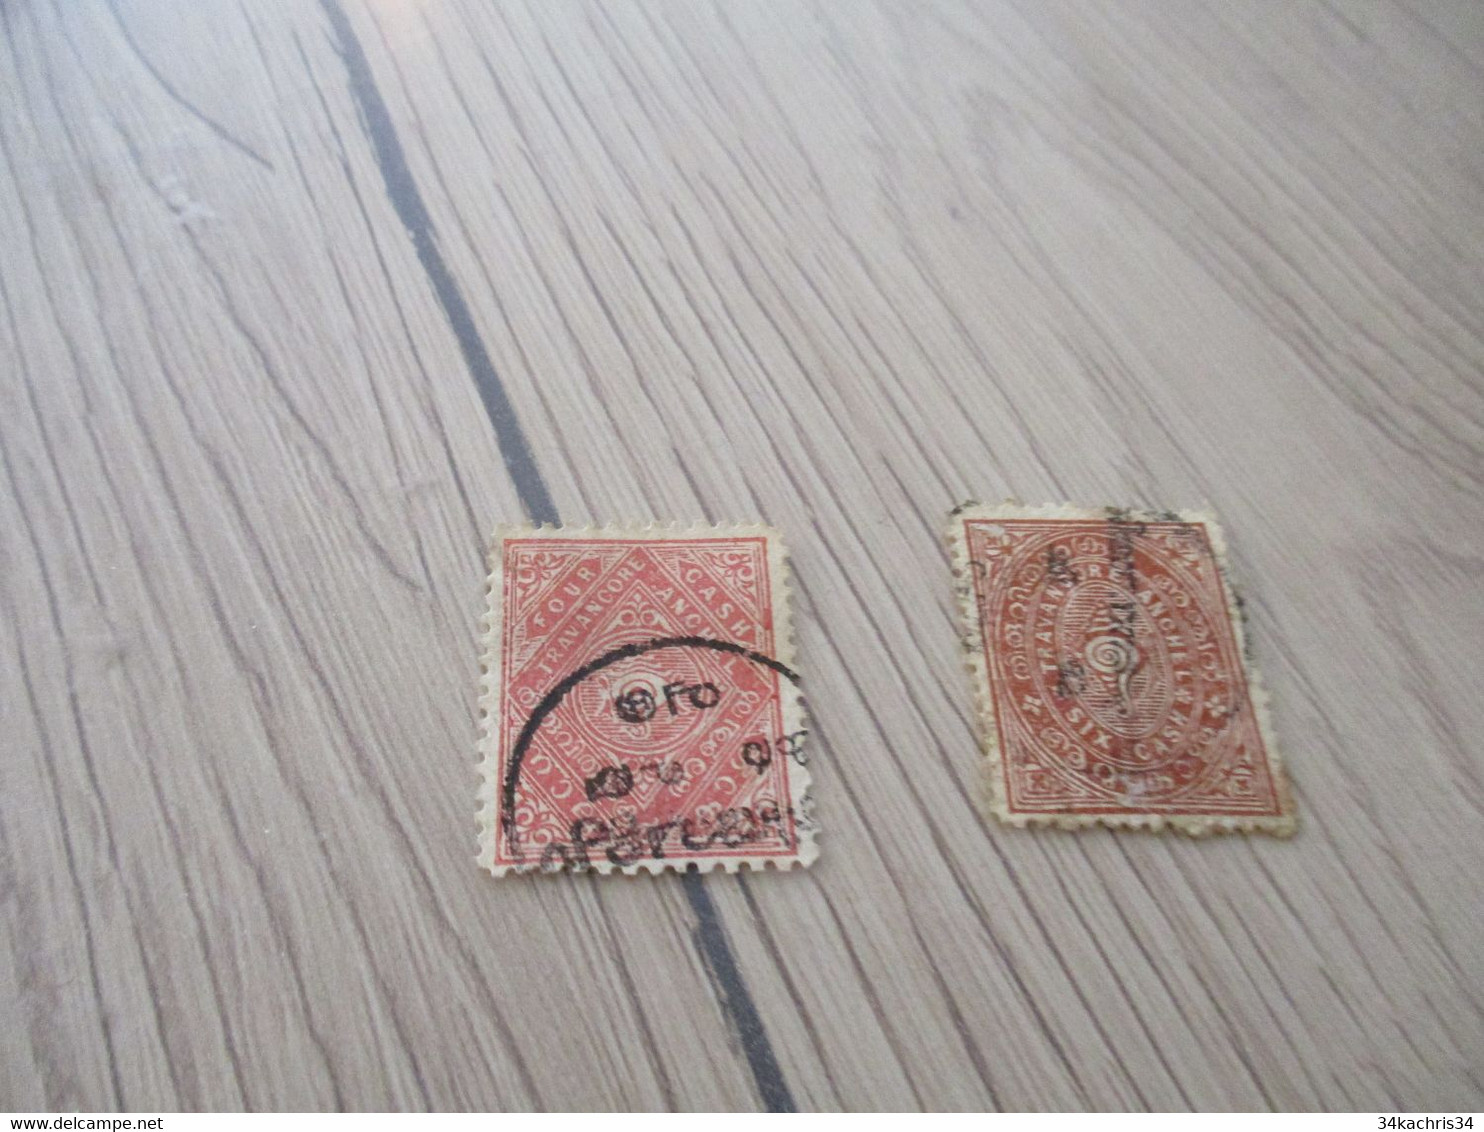 GA INDE INDIA ETATS INDIENS lot old stamp all state forte côte paypal ok with conditions out of EU